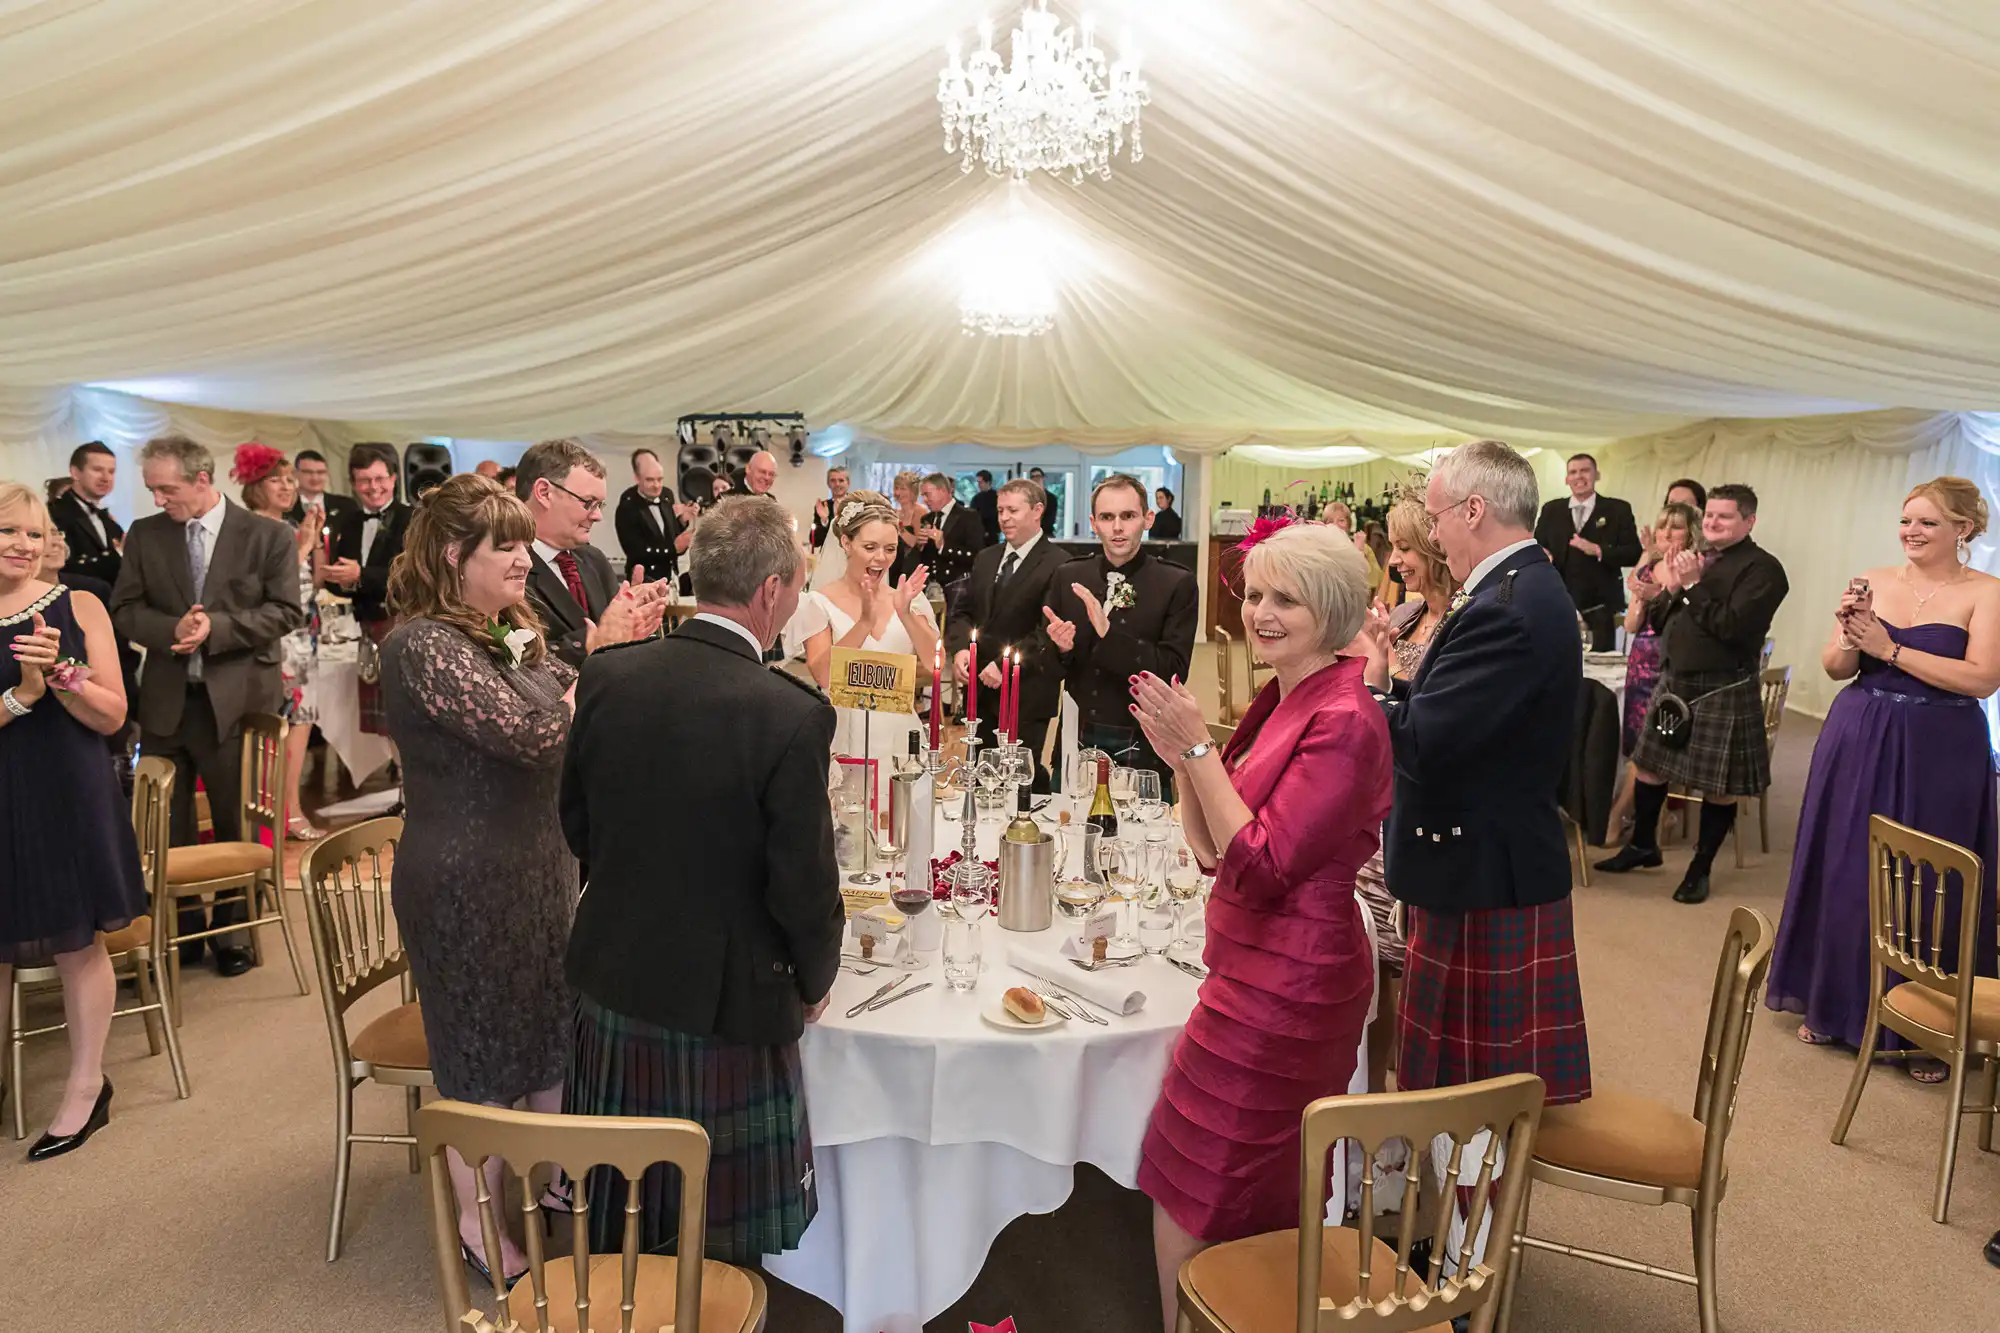 Guests in formal and semi-formal attire, including kilts, applauding at a wedding reception inside a tent with chandeliers.